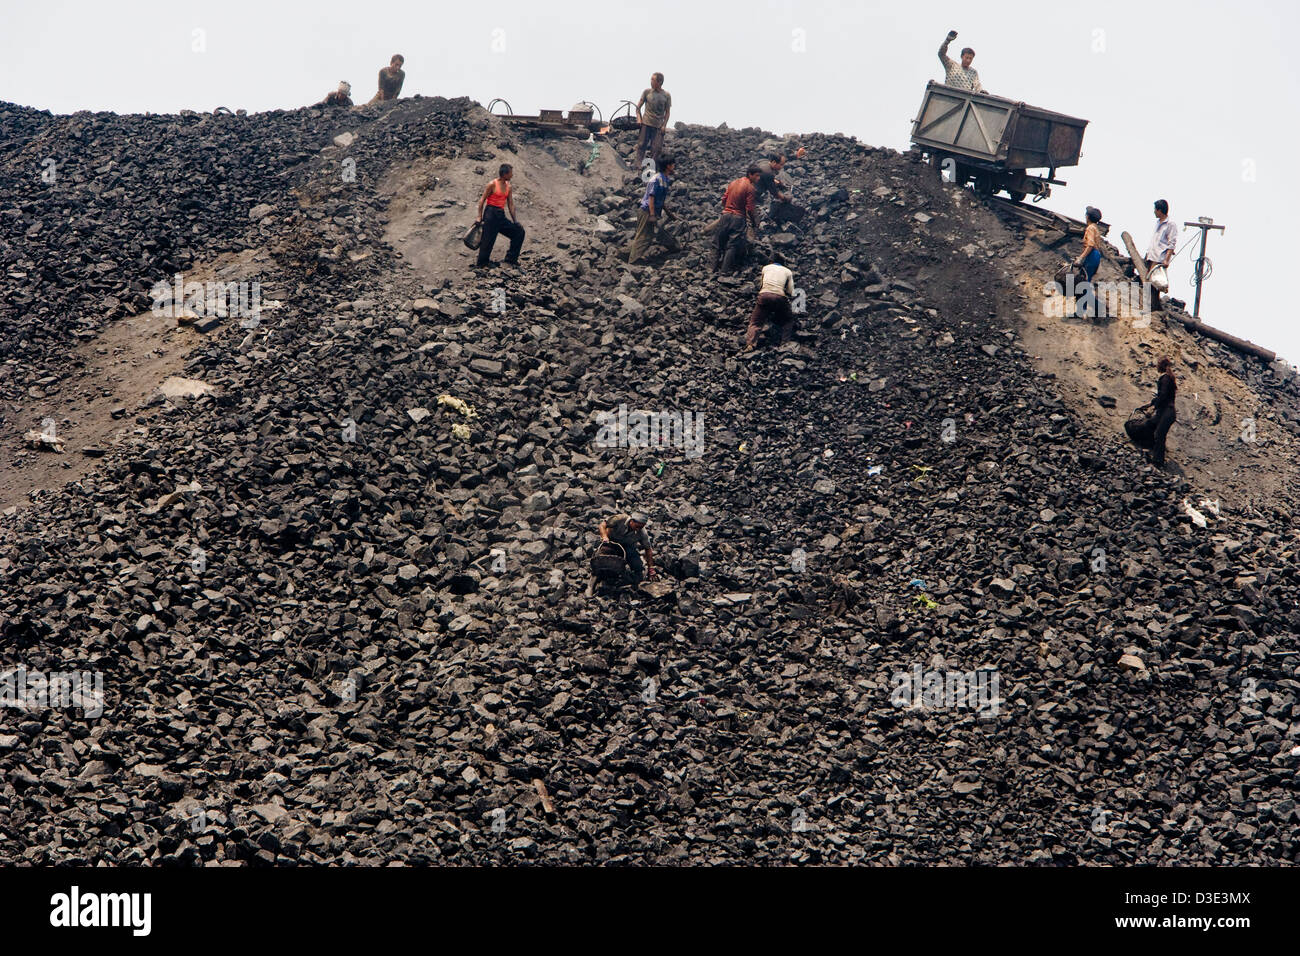 YI TANG, SHANXI PROVINCE, CHINA - AUGUST 2007: Villagers scavenge for scrap coal as a mine rail cart is unloaded onto a slag heap Stock Photo